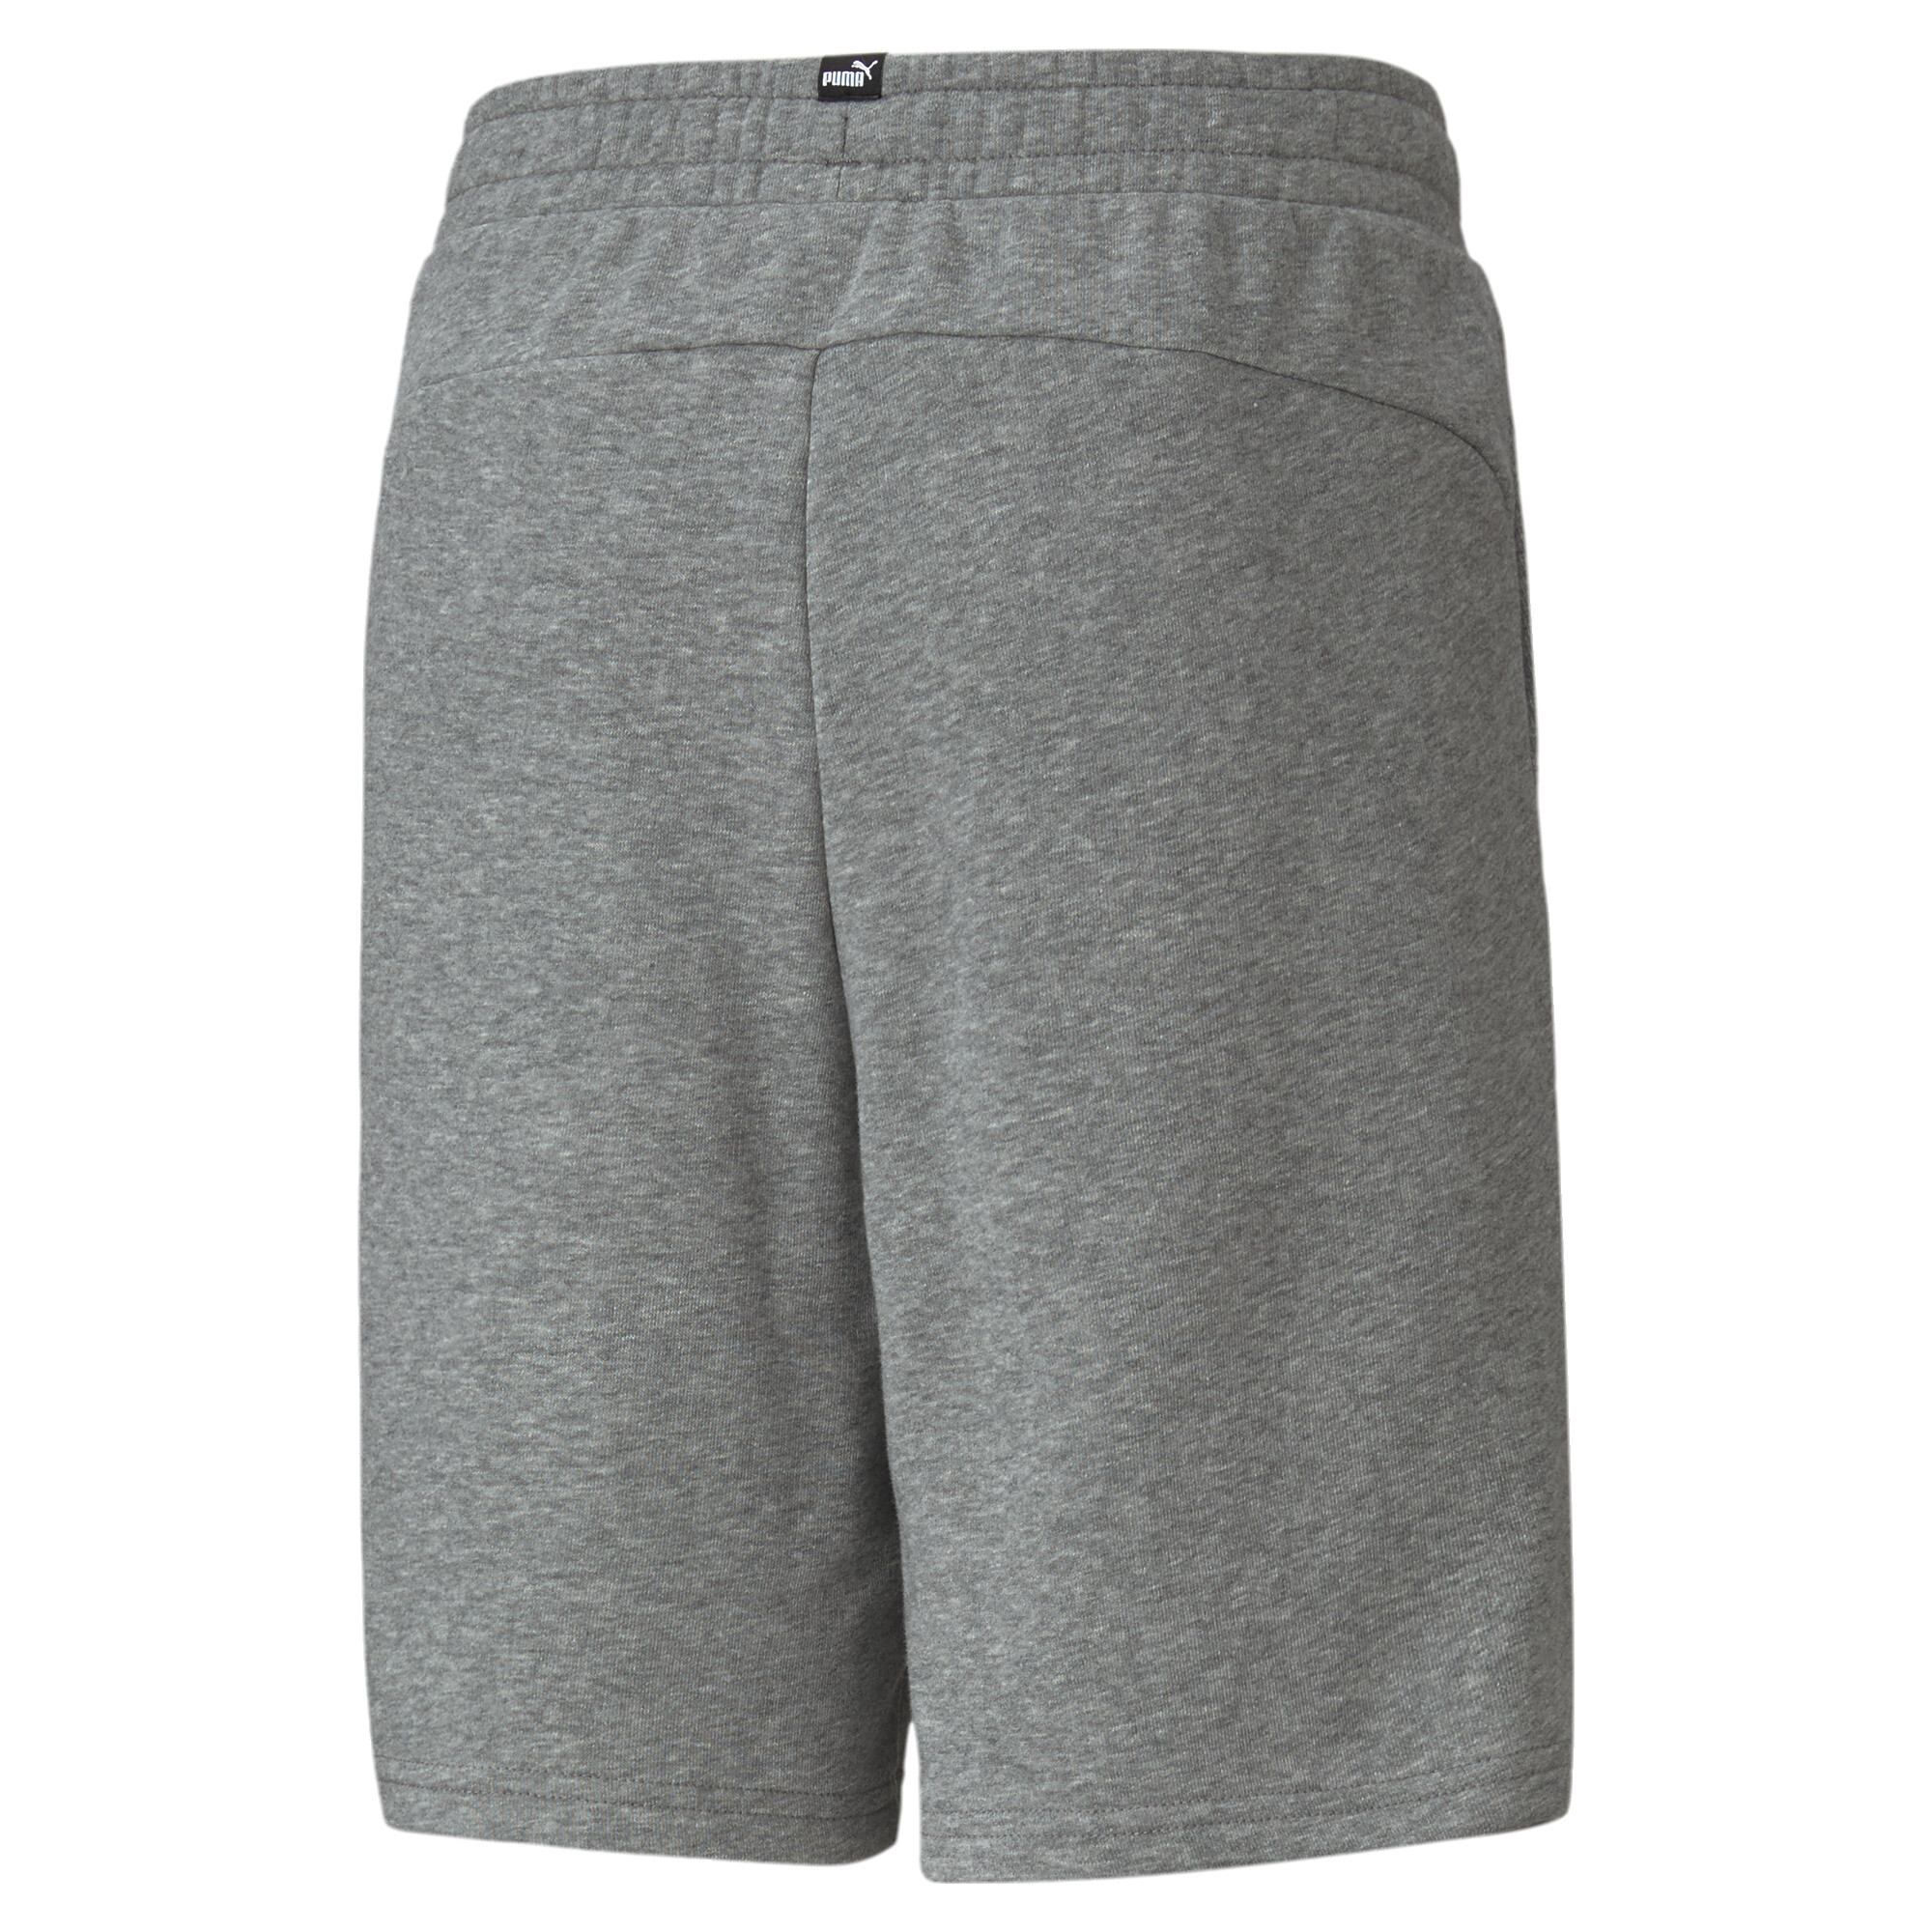 PUMA Essentials Sweat Shorts In Heather, Size 5-6 Youth